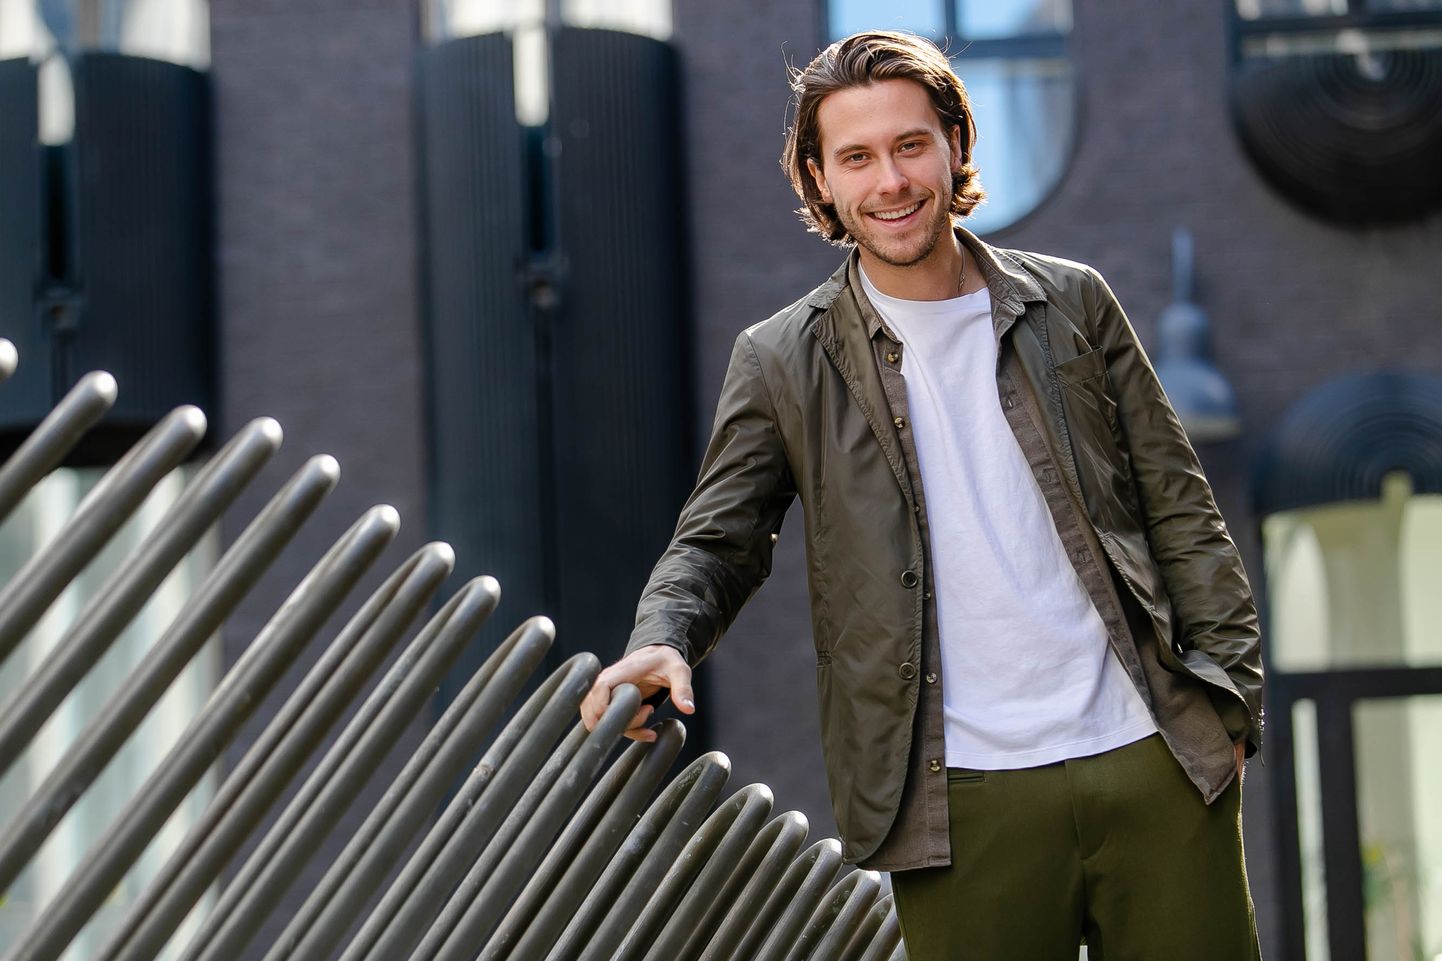 Rotermanni kvartal, Tallinn. 12.04.2019. 
Arteri persoon Victor Crone. 

Victor Fritz-Crone also known as Vic Heart, is a Swedish singer and guitarist. He will represent Estonia in the Eurovision Song Contest 2019 in Tel Aviv with the song "Storm".[1]
Foto: Madis Sinivee/Postimees Grupp